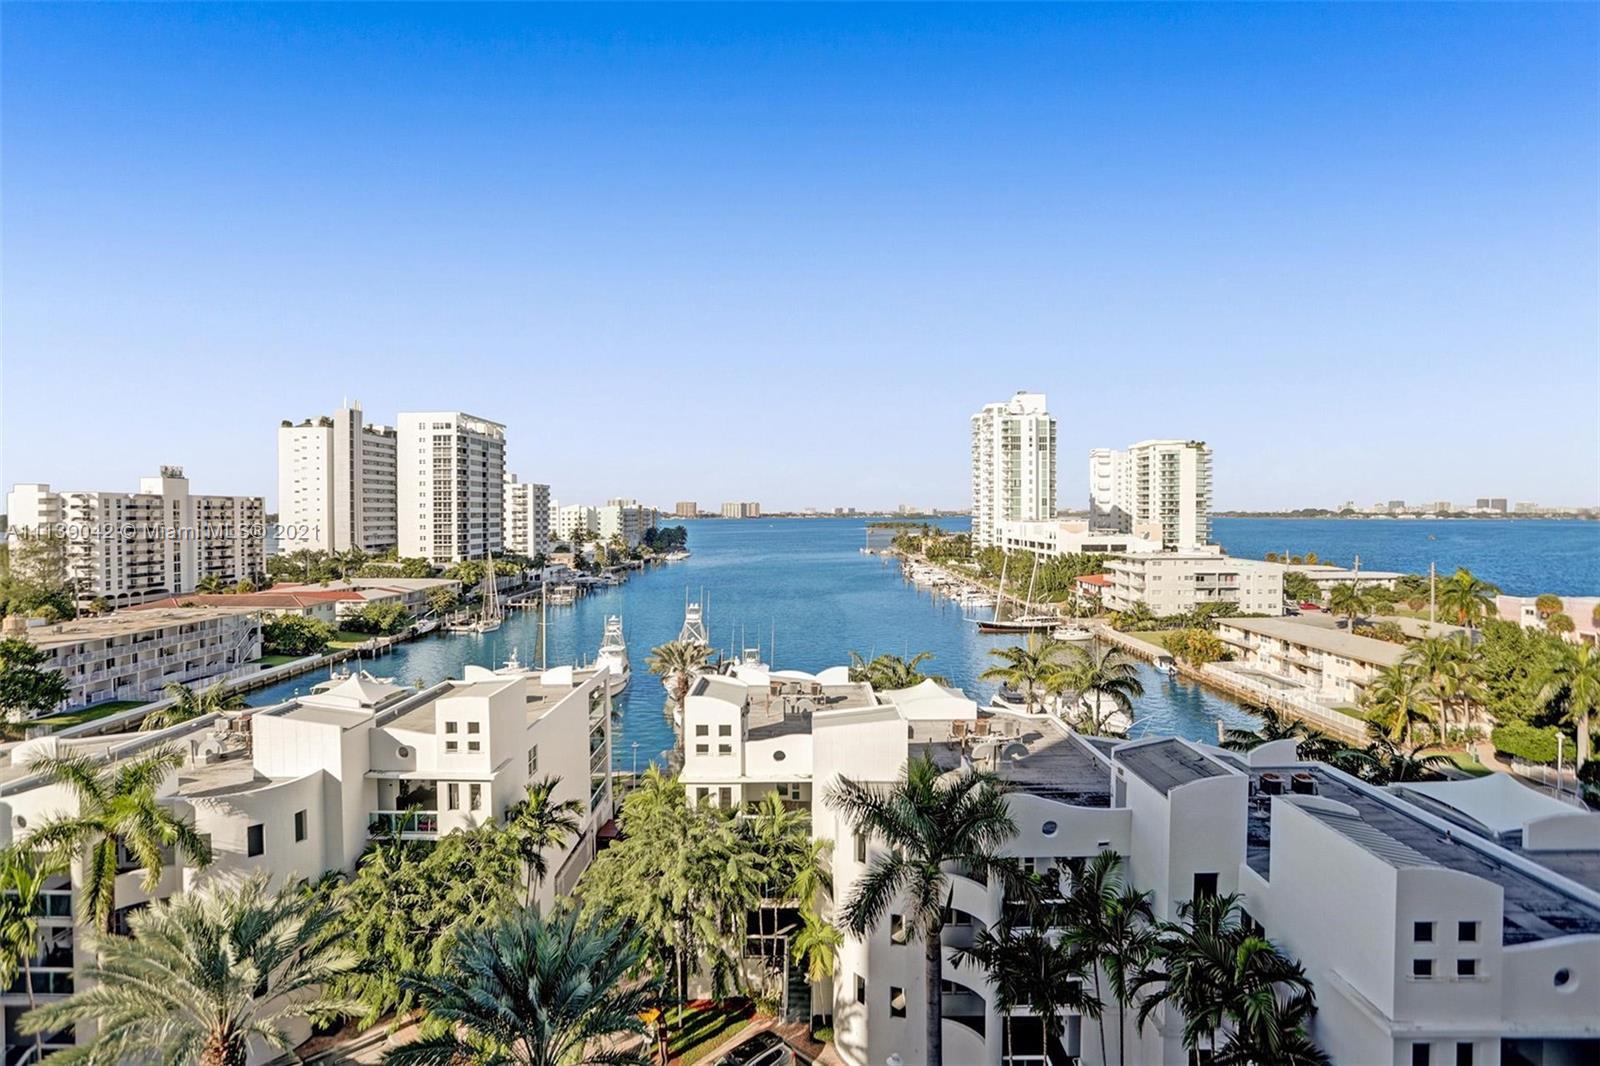 Immaculate 2 bedroom/2 bathroom condo with gorgeous water views from every room. Open kitchen with g